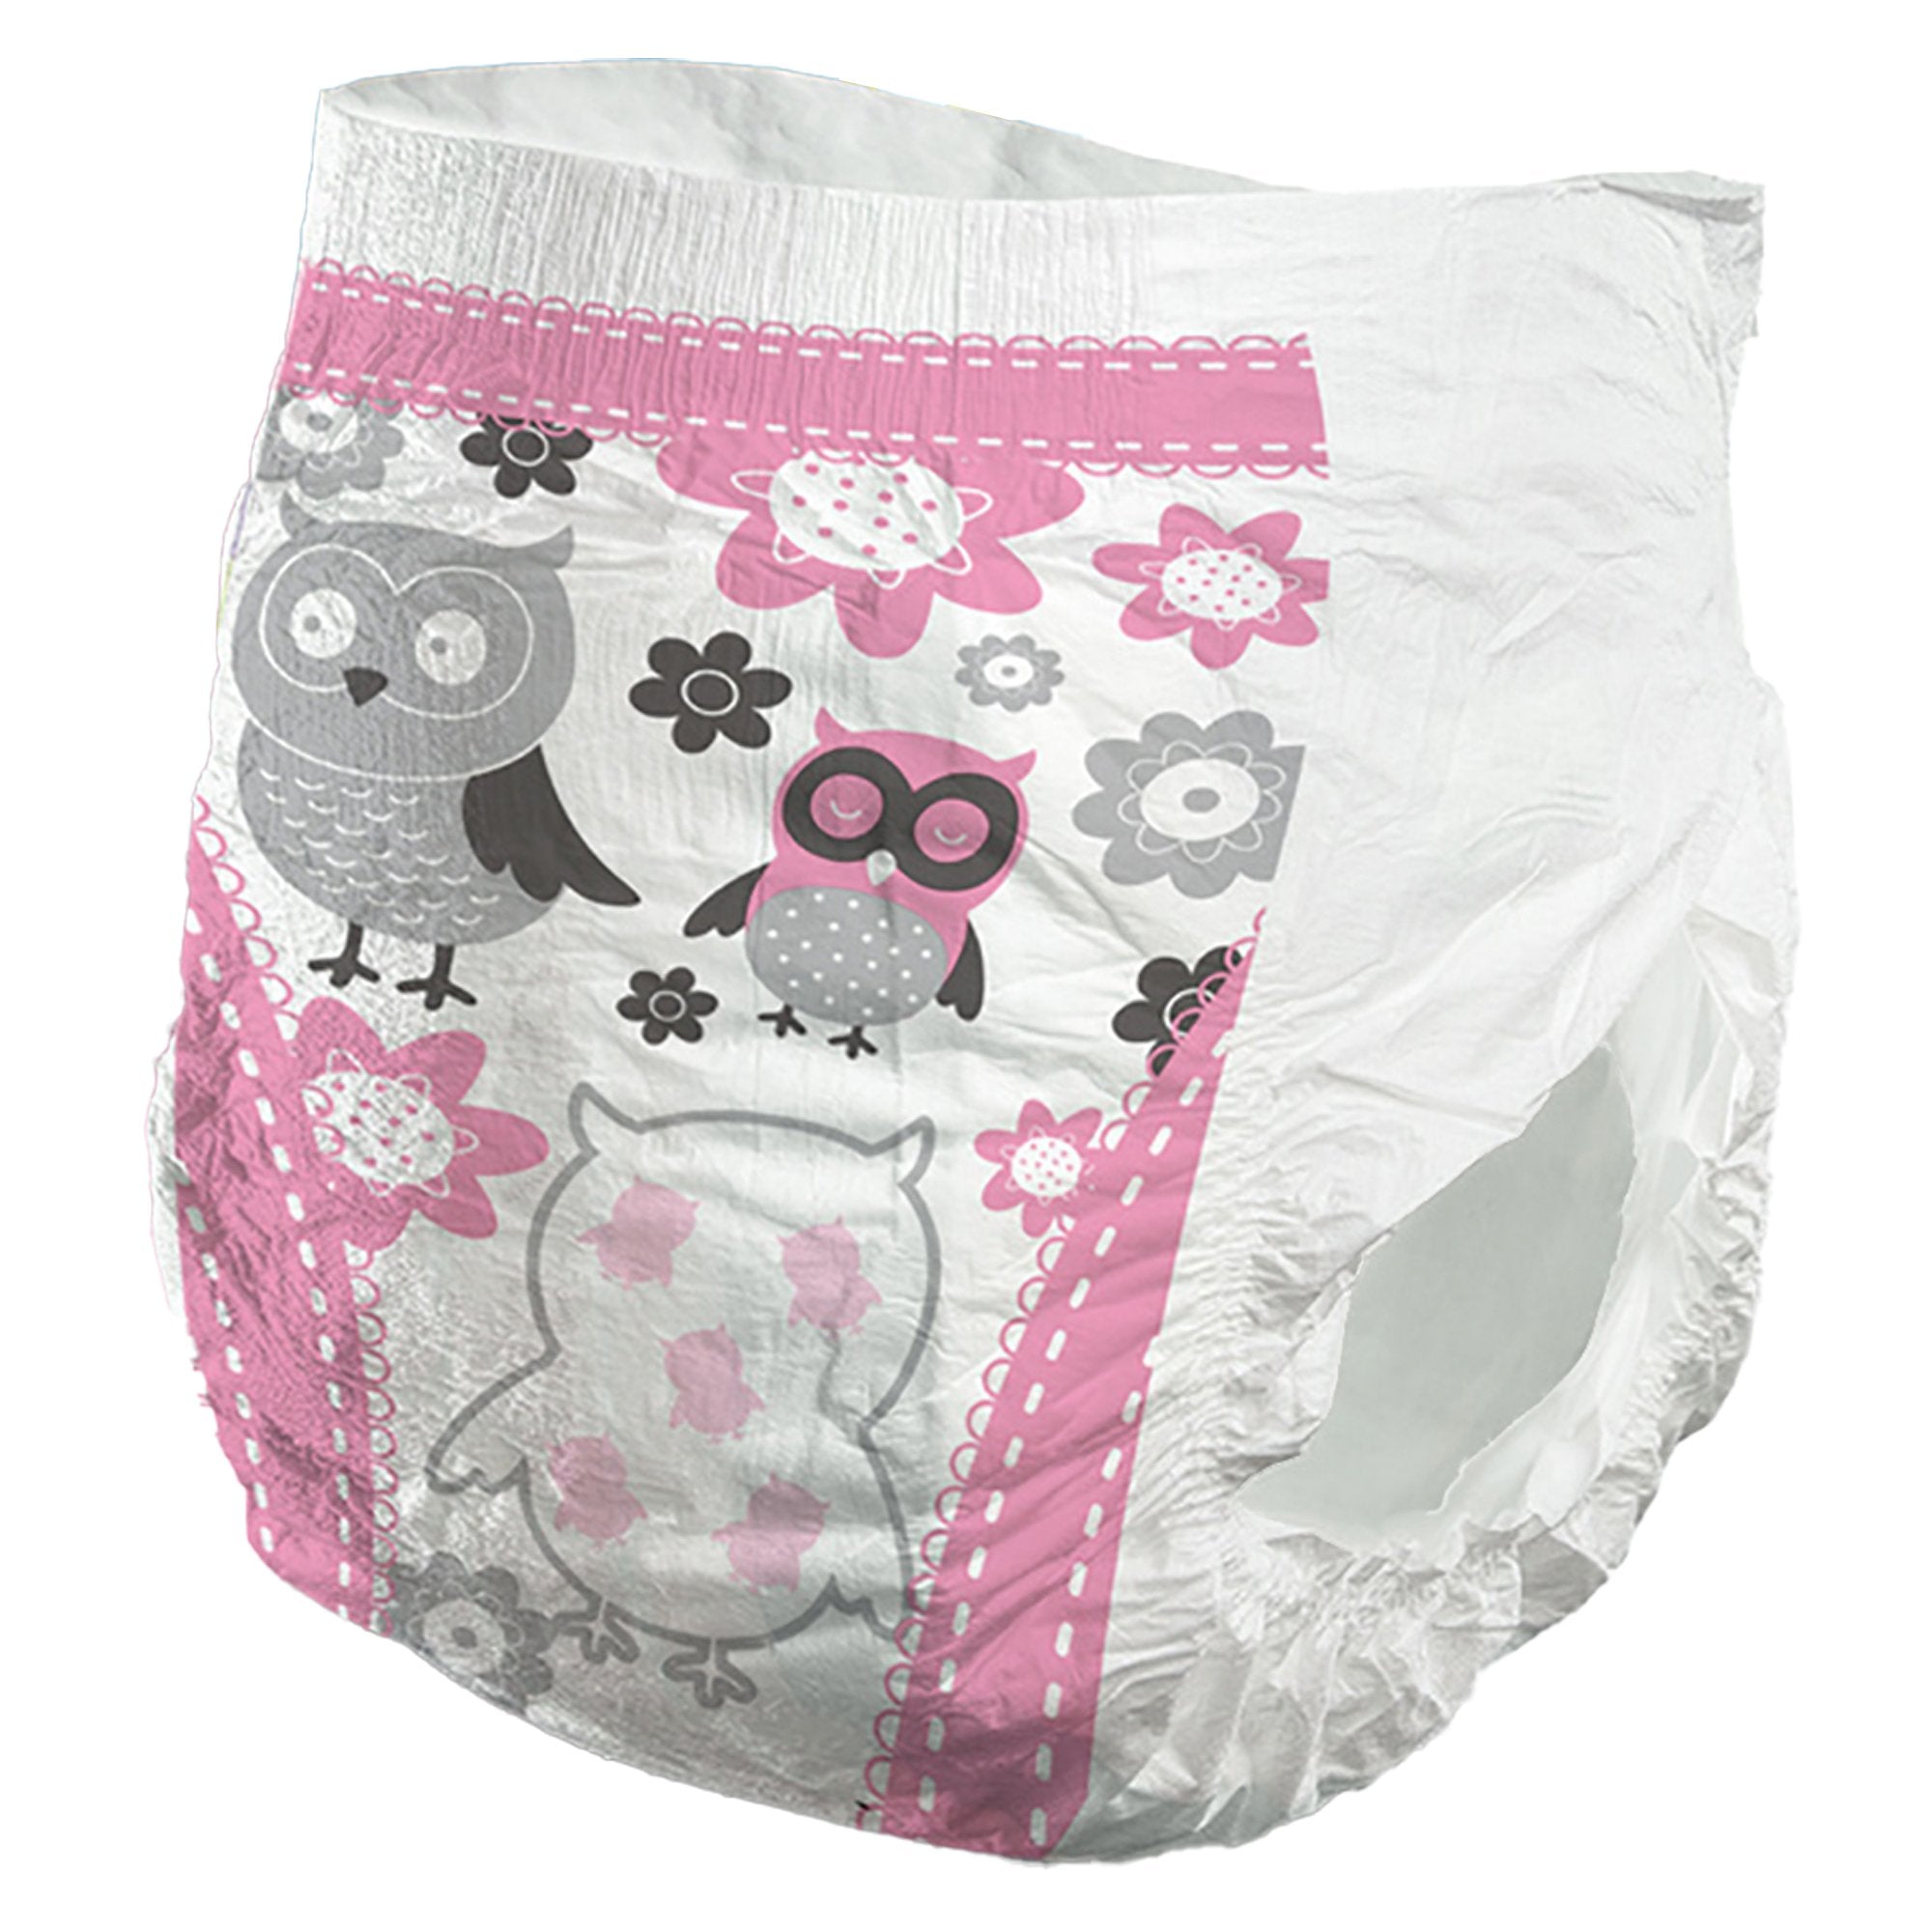 Female Toddler Training Pants Comfees Pull On with Tear Away Seams Size 4T to 5T Disposable Moderate Absorbency